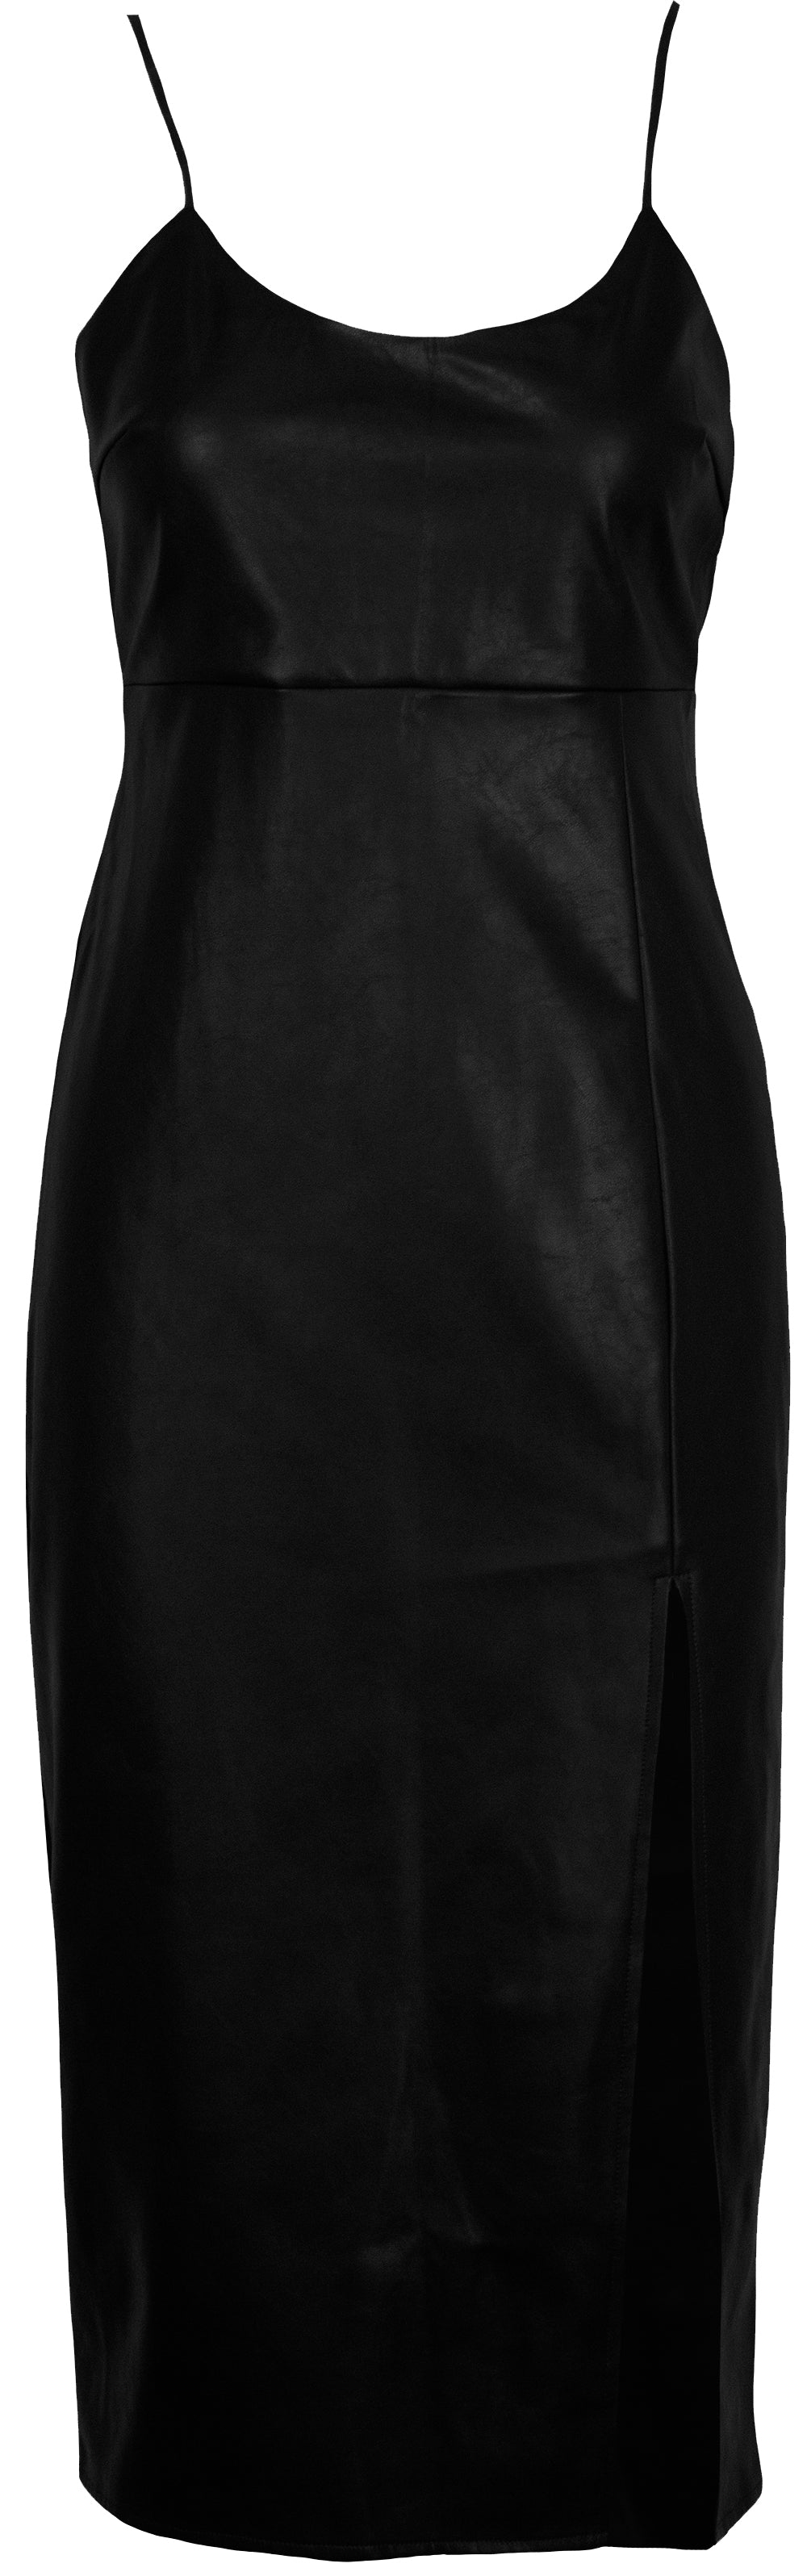 CONNOR FAUX LEATHER DRESS